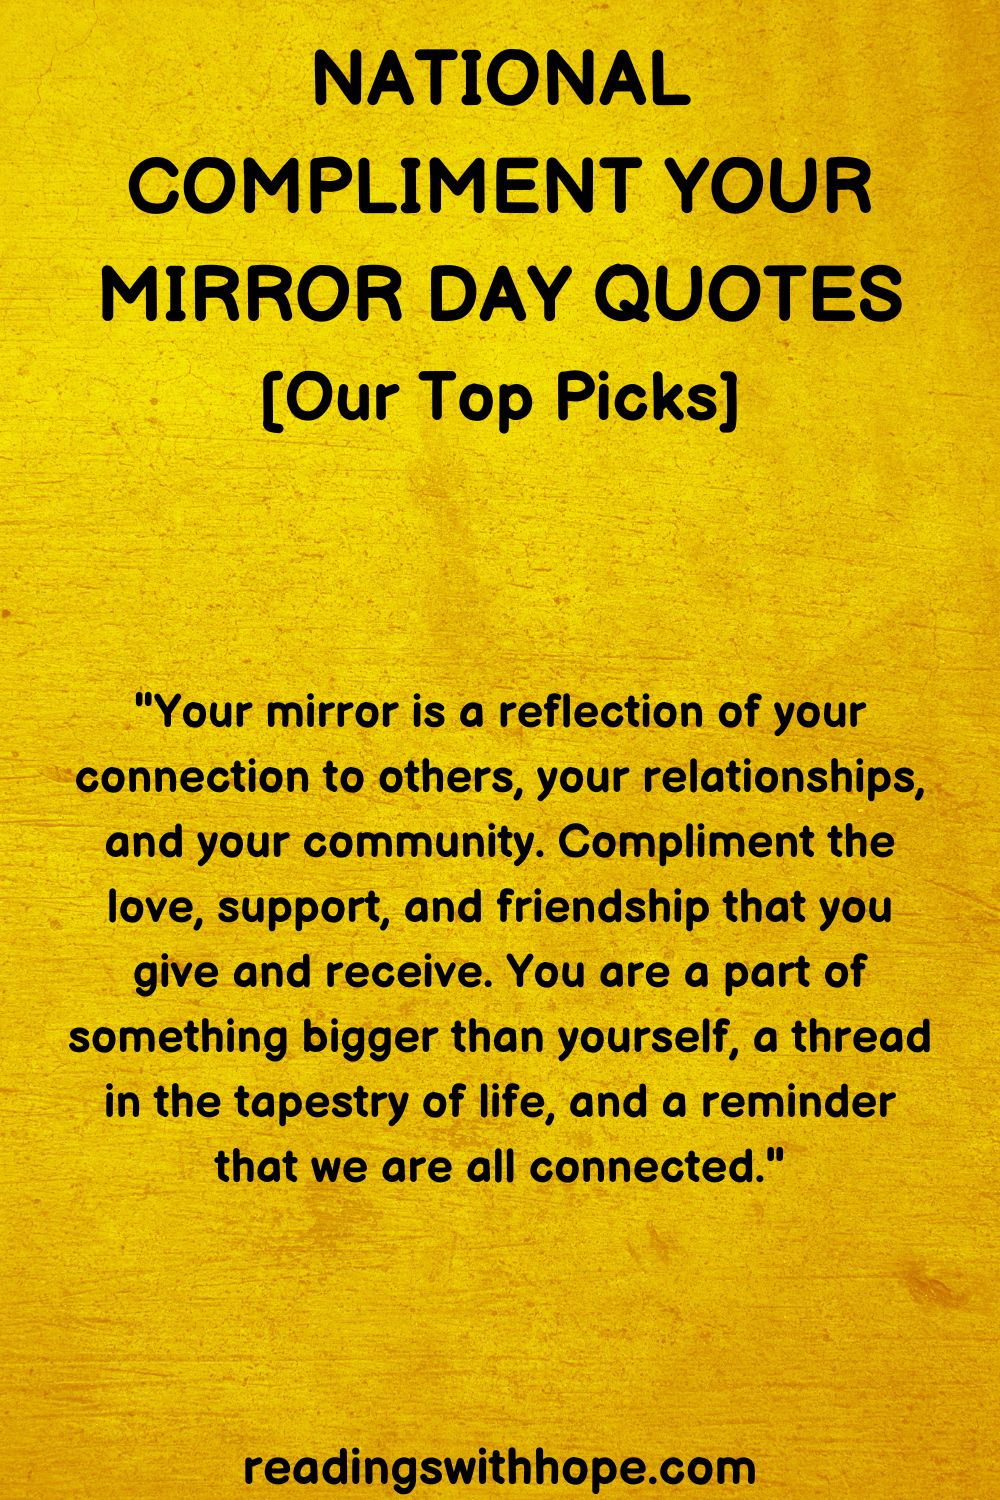 40 National Compliment Your Mirror Day Quotes, Messages and Wishes